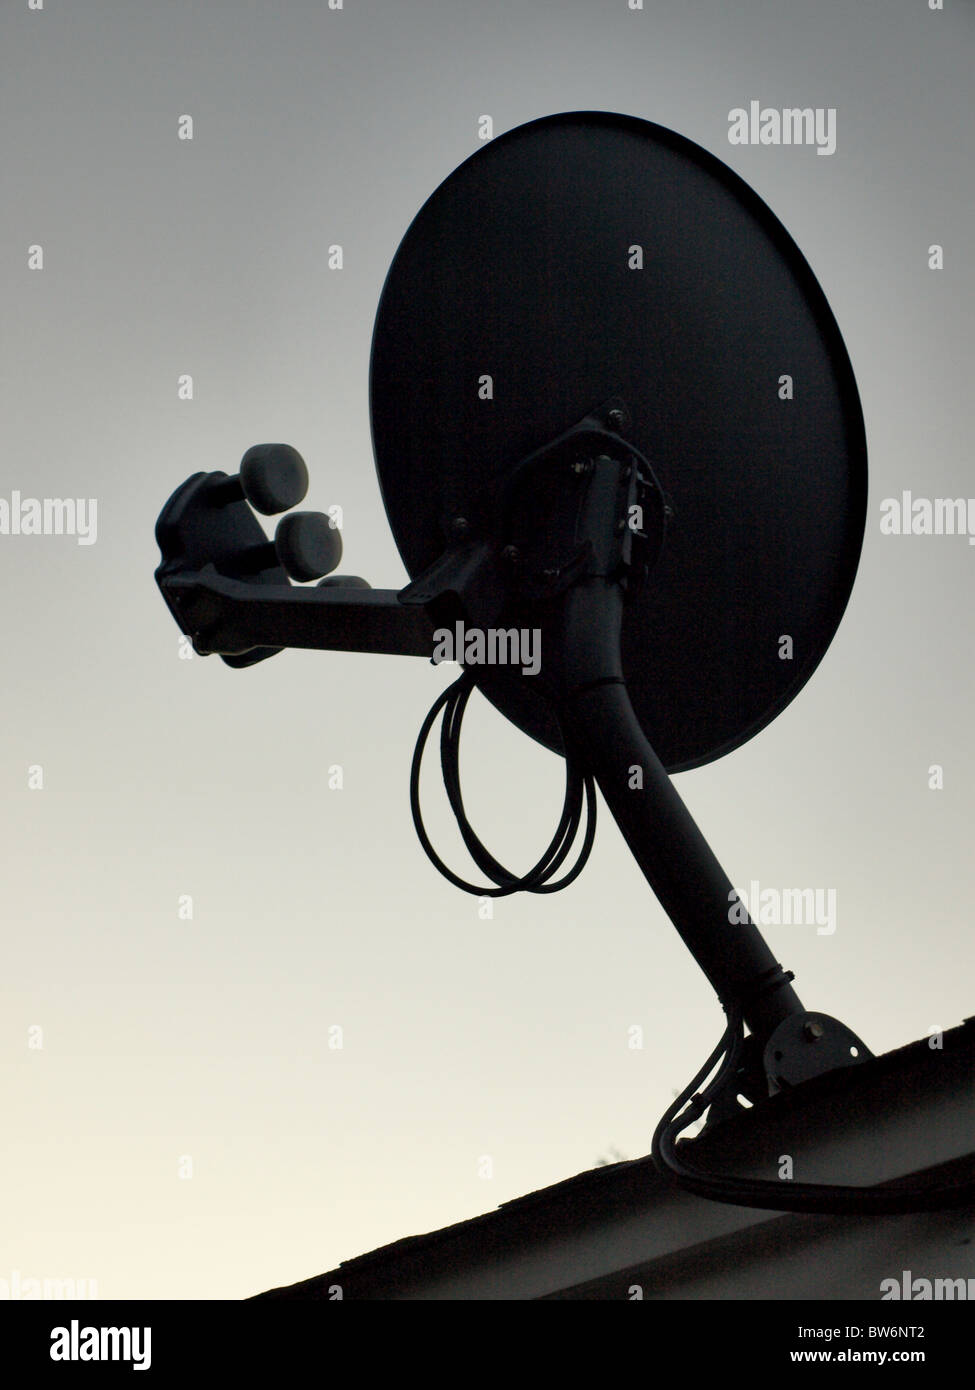 satellite television tv dish on roof sillouette Stock Photo